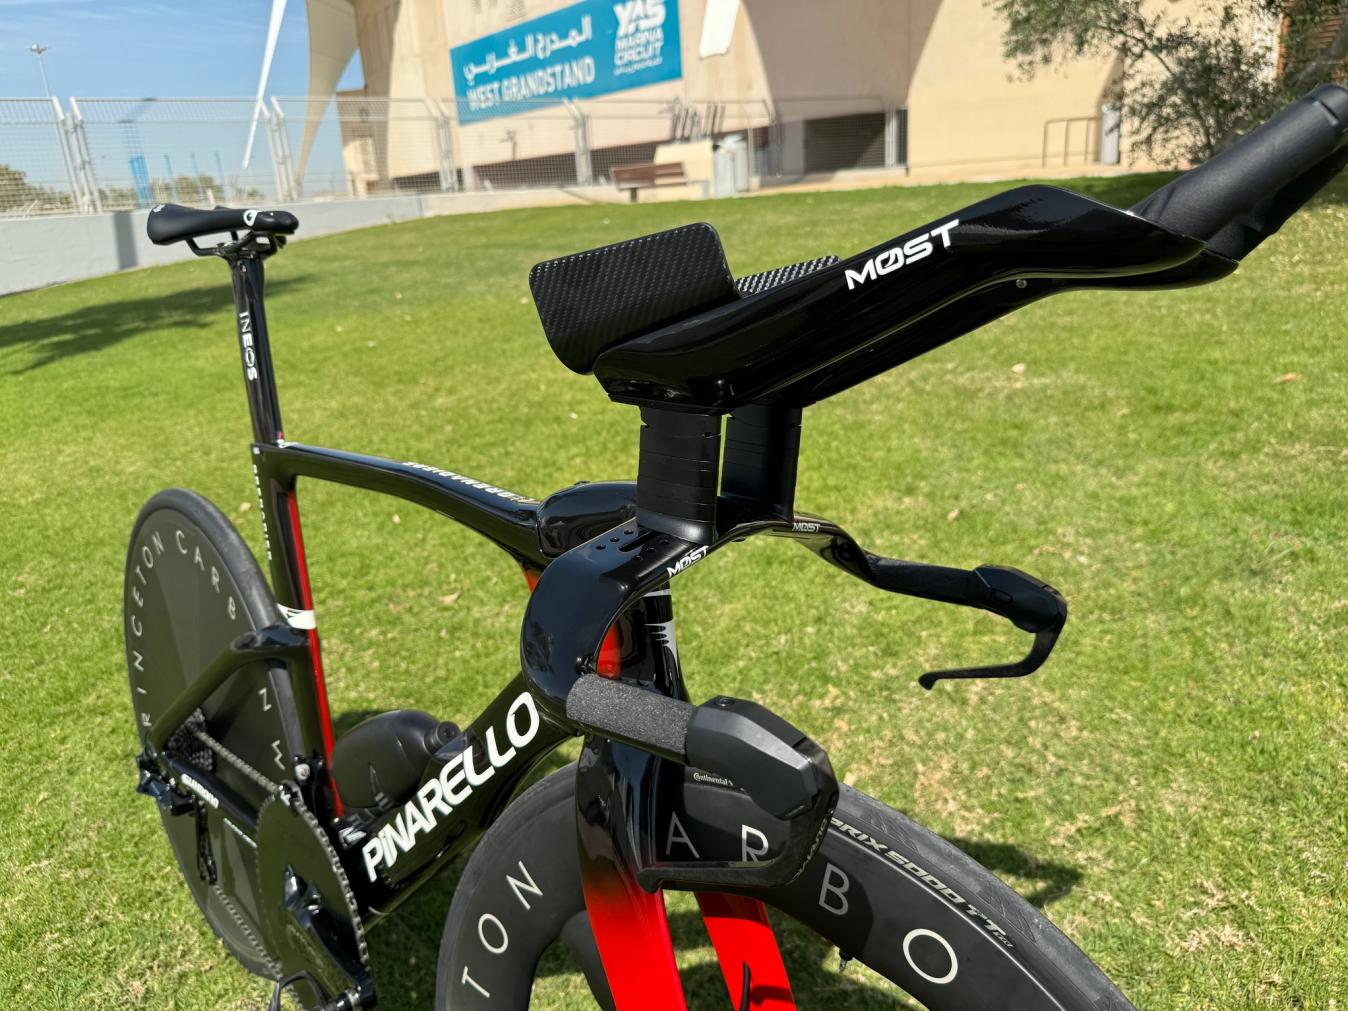 The British outfit had some more interesting features on their Pinarello Bolide bike, including the custom Most cockpit. These were introduced when the latest version of the Pinarello Bolide was released ahead of the 2022 Tour de France